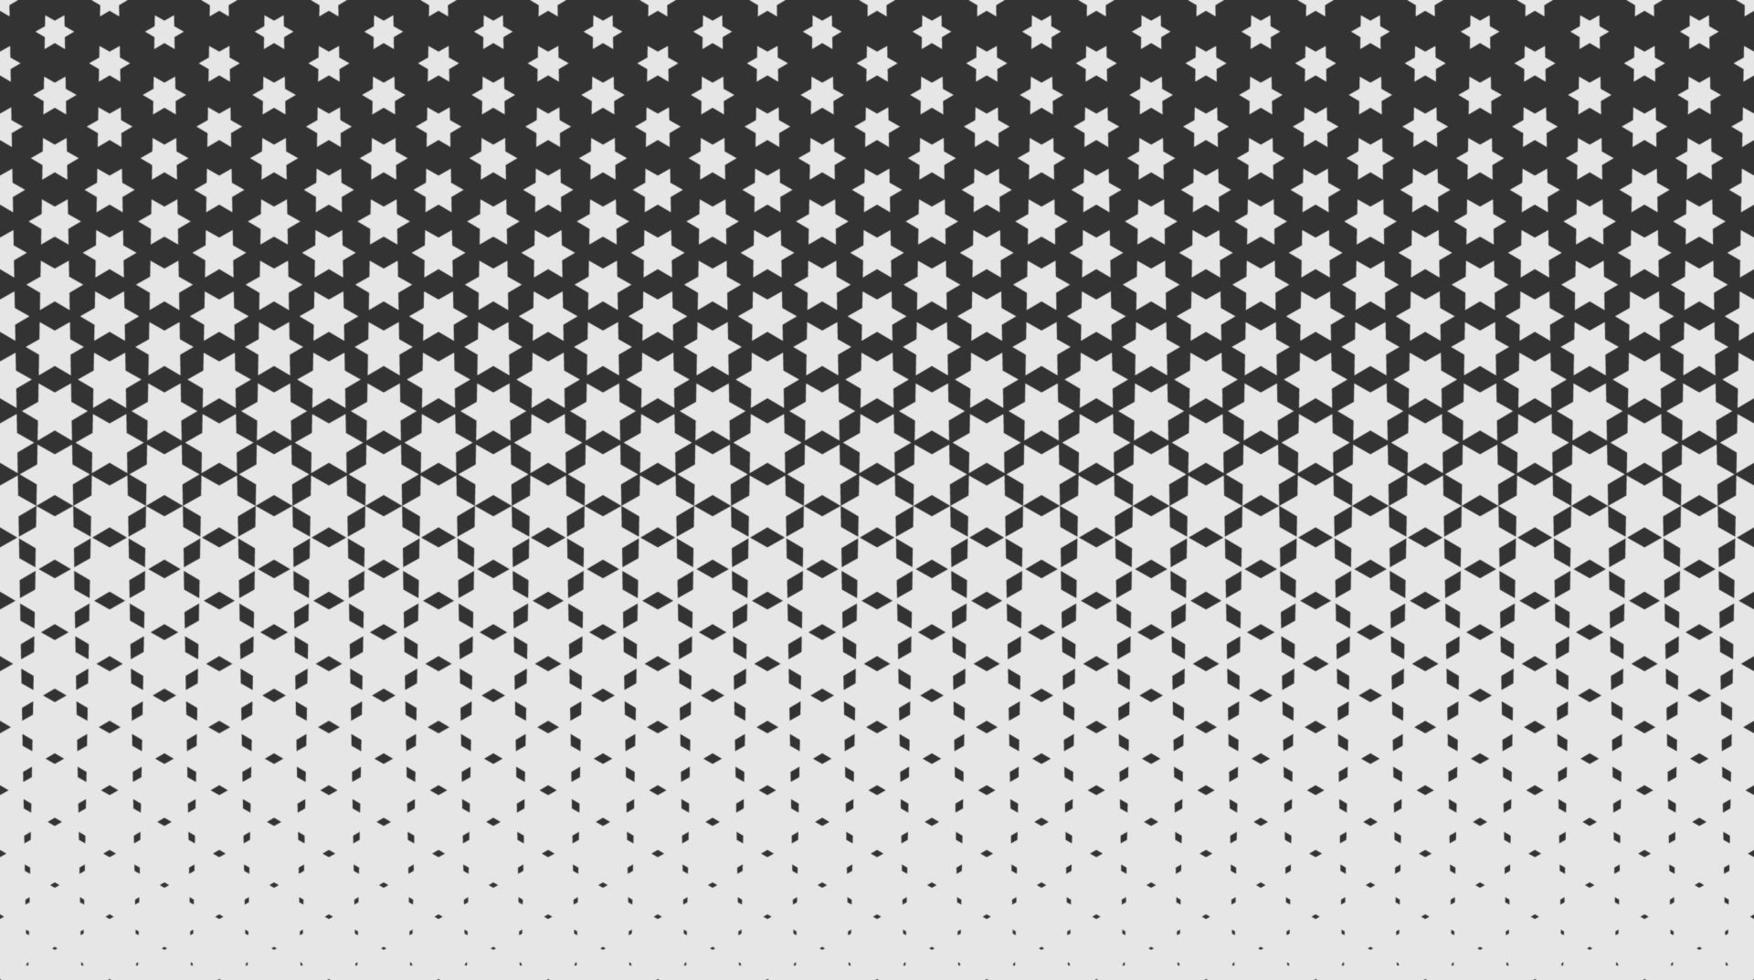 Monochrome repeating geometric texture with stars and gradient. Vector seamless pattern for background, wallpaper, textile, fabric, web site backdrop. Simple shapes.